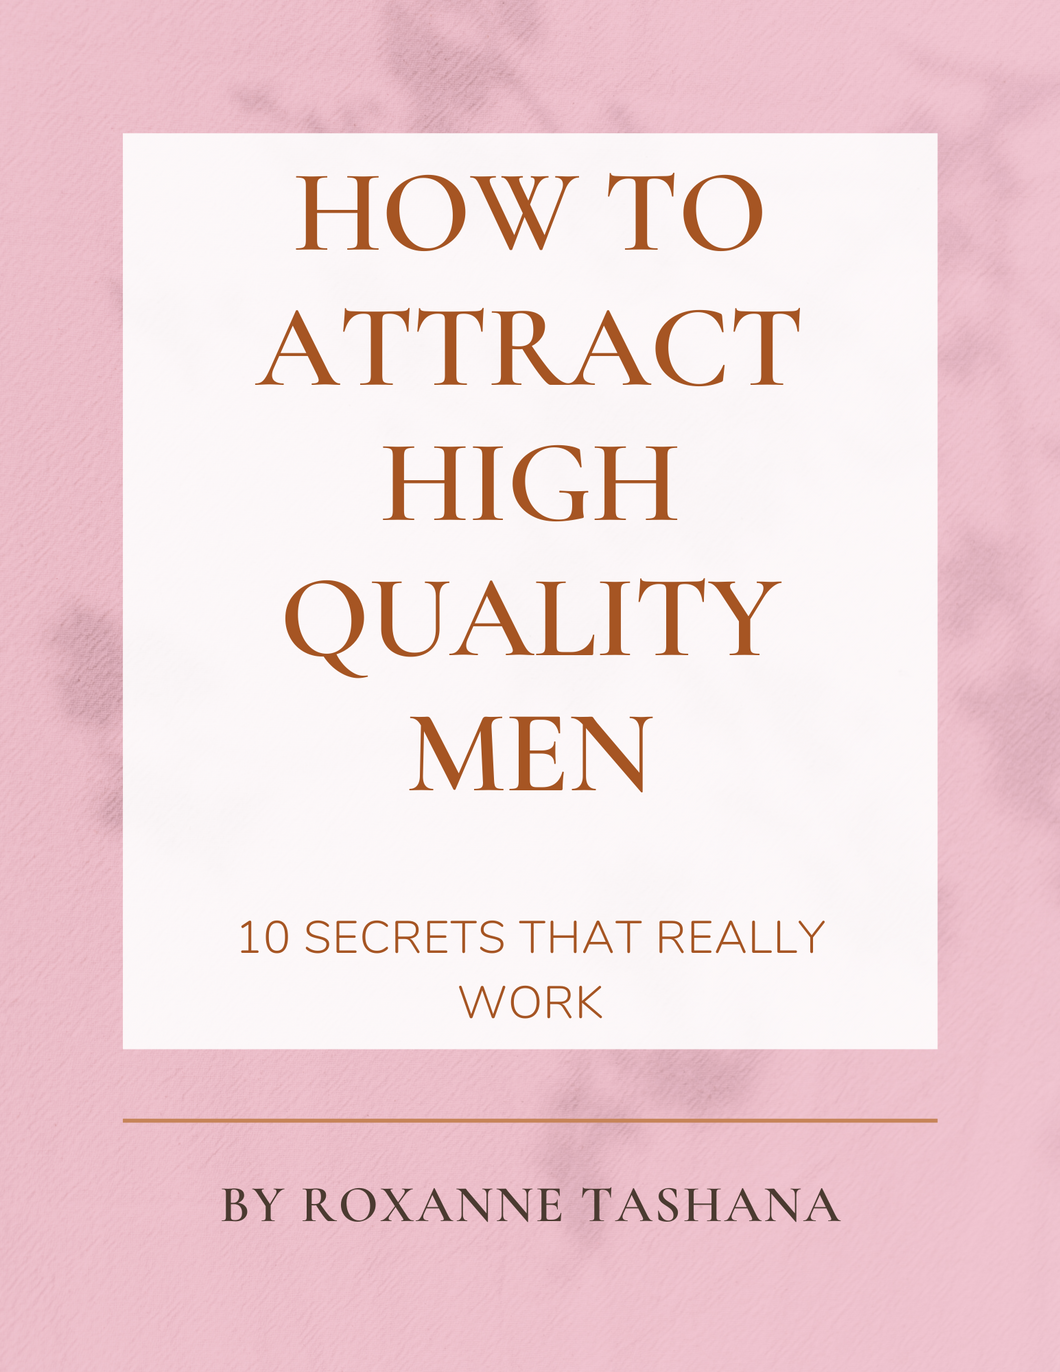 EBOOK: HOW TO ATTRACT HIGH QUALITY MEN